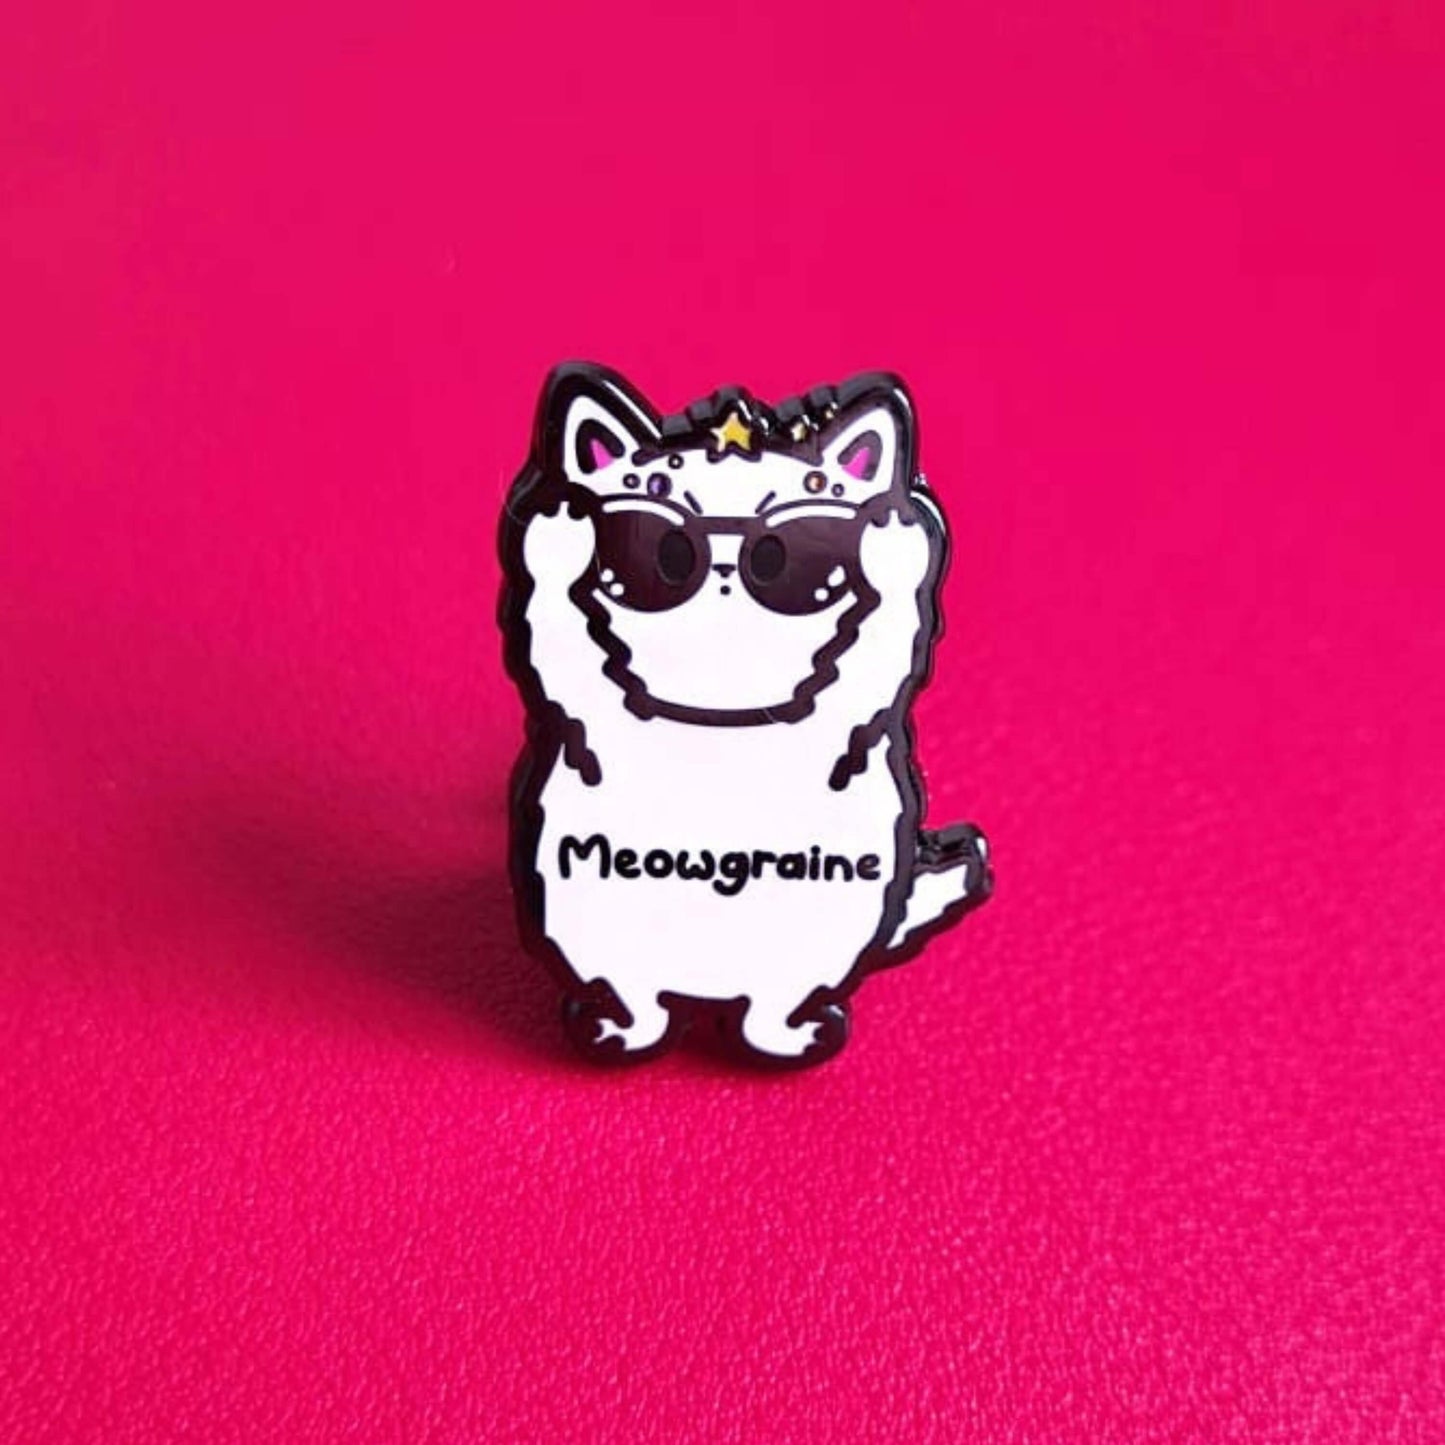 The Meowgraine Cat Enamel Pin - Migraine on a red background. A white stressed cat clutching a pair of black sunglasses to its eyes with multicoloured spots and stars over its head, across its middle reads 'meowgraine'. The hand drawn design is raising awareness for migraines and headaches.